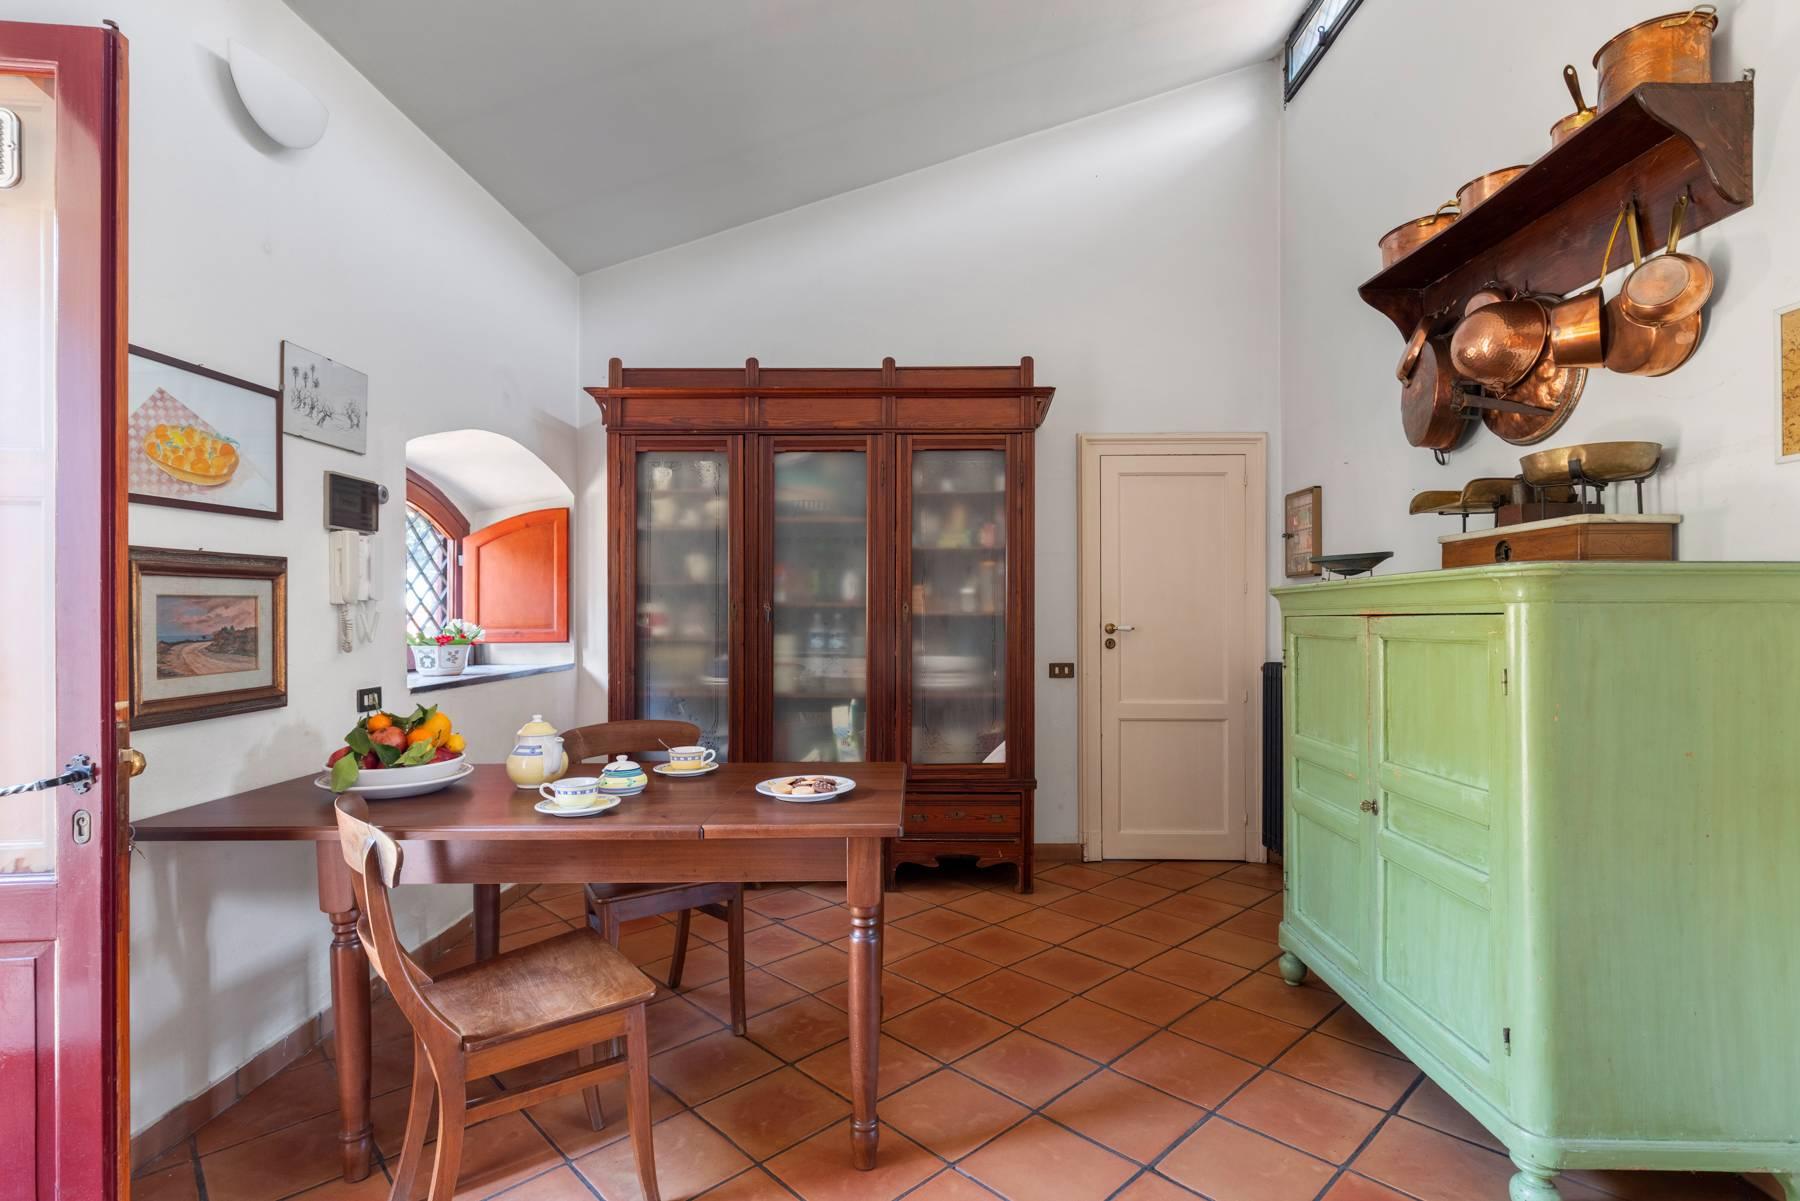 Renovated 18th-century Sicilian house at the foot of Volcano Etna - 25